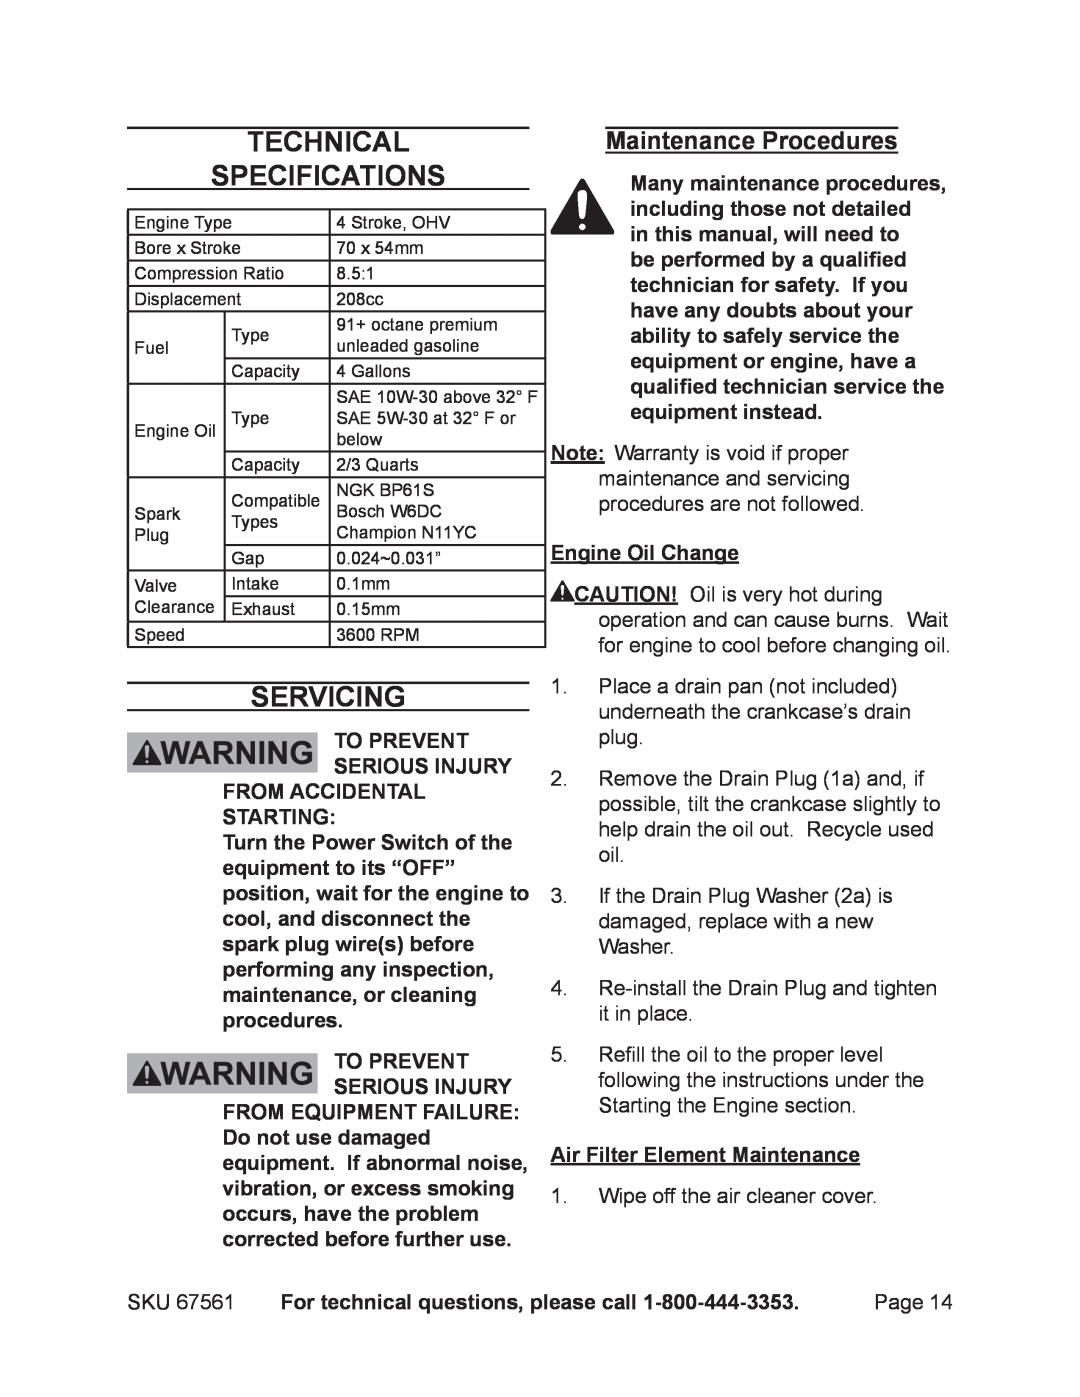 Chicago Electric 67561 manual Technical Specifications, Servicing, To prevent serious injury from accidental starting 